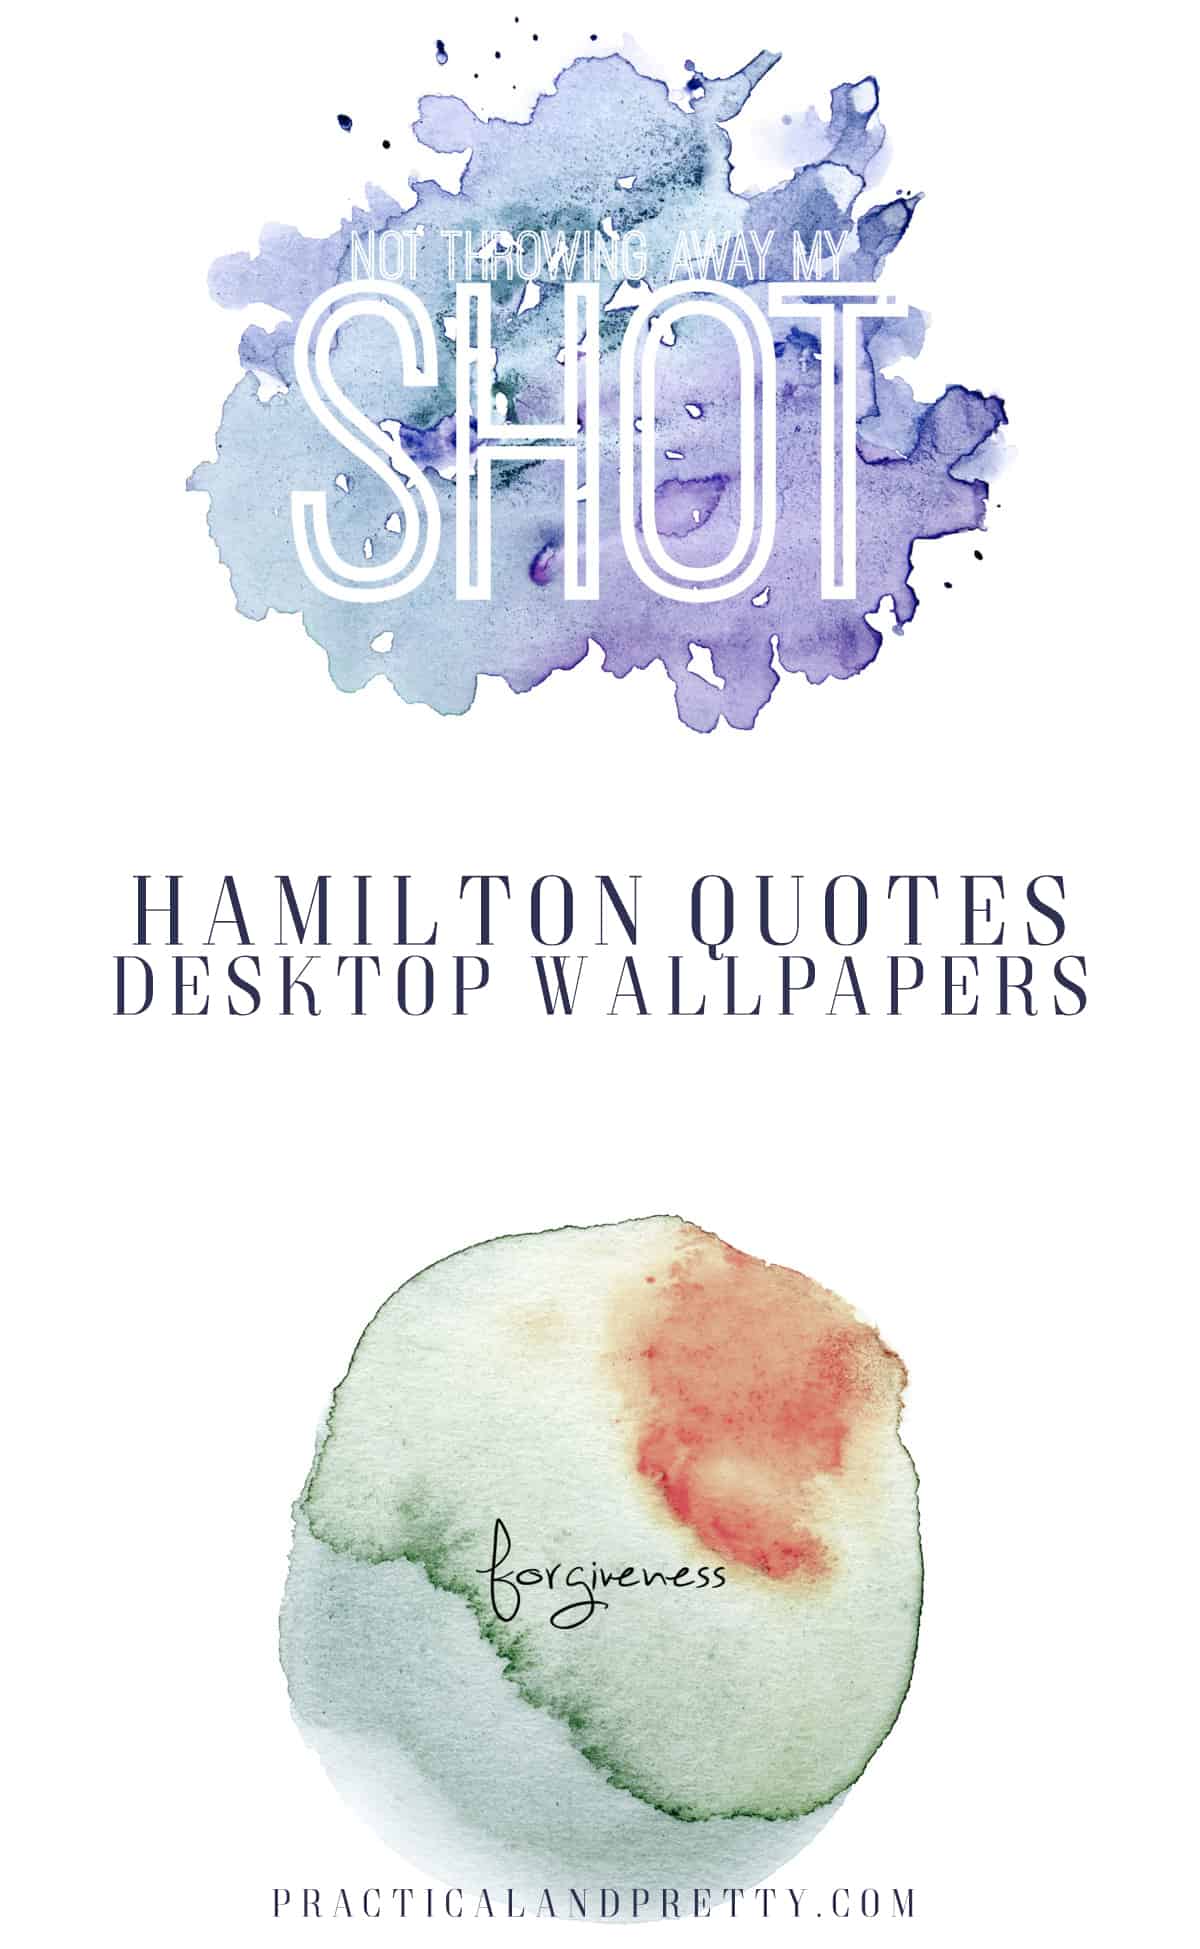 Hamilton Quote Wallpapers for Your Desktop   Practical and Pretty